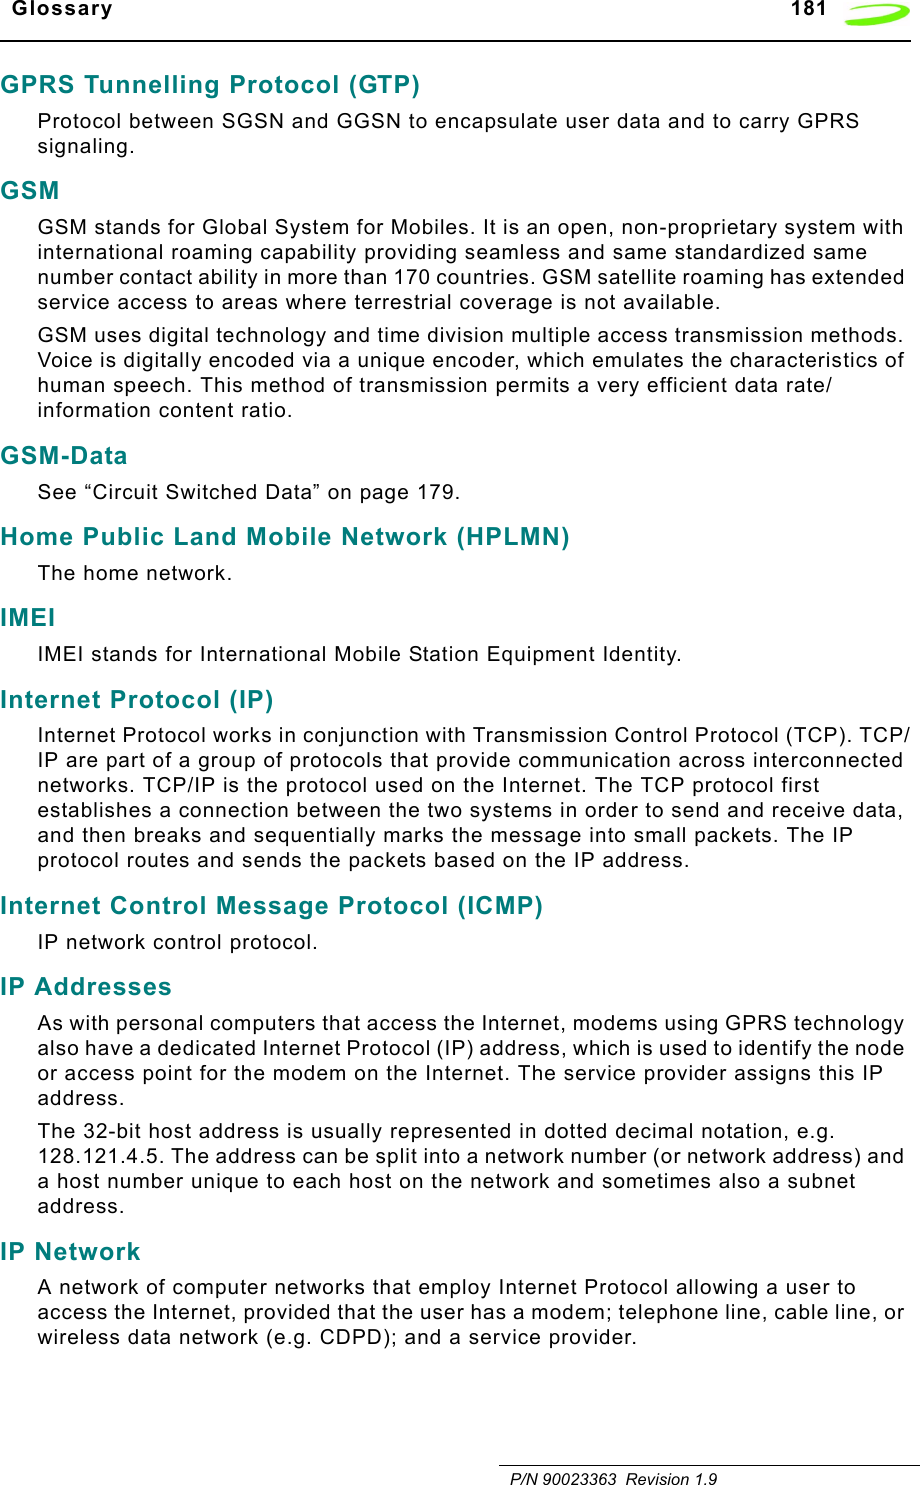   Glossary 181   P/N 90023363  Revision 1.9GPRS Tunnelling Protocol (GTP)Protocol between SGSN and GGSN to encapsulate user data and to carry GPRS signaling.GSMGSM stands for Global System for Mobiles. It is an open, non-proprietary system with international roaming capability providing seamless and same standardized same number contact ability in more than 170 countries. GSM satellite roaming has extended service access to areas where terrestrial coverage is not available.GSM uses digital technology and time division multiple access transmission methods. Voice is digitally encoded via a unique encoder, which emulates the characteristics of human speech. This method of transmission permits a very efficient data rate/information content ratio.GSM-DataSee “Circuit Switched Data” on page 179.Home Public Land Mobile Network (HPLMN)The home network.IMEIIMEI stands for International Mobile Station Equipment Identity.Internet Protocol (IP)Internet Protocol works in conjunction with Transmission Control Protocol (TCP). TCP/IP are part of a group of protocols that provide communication across interconnected networks. TCP/IP is the protocol used on the Internet. The TCP protocol first establishes a connection between the two systems in order to send and receive data, and then breaks and sequentially marks the message into small packets. The IP protocol routes and sends the packets based on the IP address.Internet Control Message Protocol (ICMP)IP network control protocol.IP AddressesAs with personal computers that access the Internet, modems using GPRS technology also have a dedicated Internet Protocol (IP) address, which is used to identify the node or access point for the modem on the Internet. The service provider assigns this IP address. The 32-bit host address is usually represented in dotted decimal notation, e.g. 128.121.4.5. The address can be split into a network number (or network address) and a host number unique to each host on the network and sometimes also a subnet address.IP NetworkA network of computer networks that employ Internet Protocol allowing a user to access the Internet, provided that the user has a modem; telephone line, cable line, or wireless data network (e.g. CDPD); and a service provider.